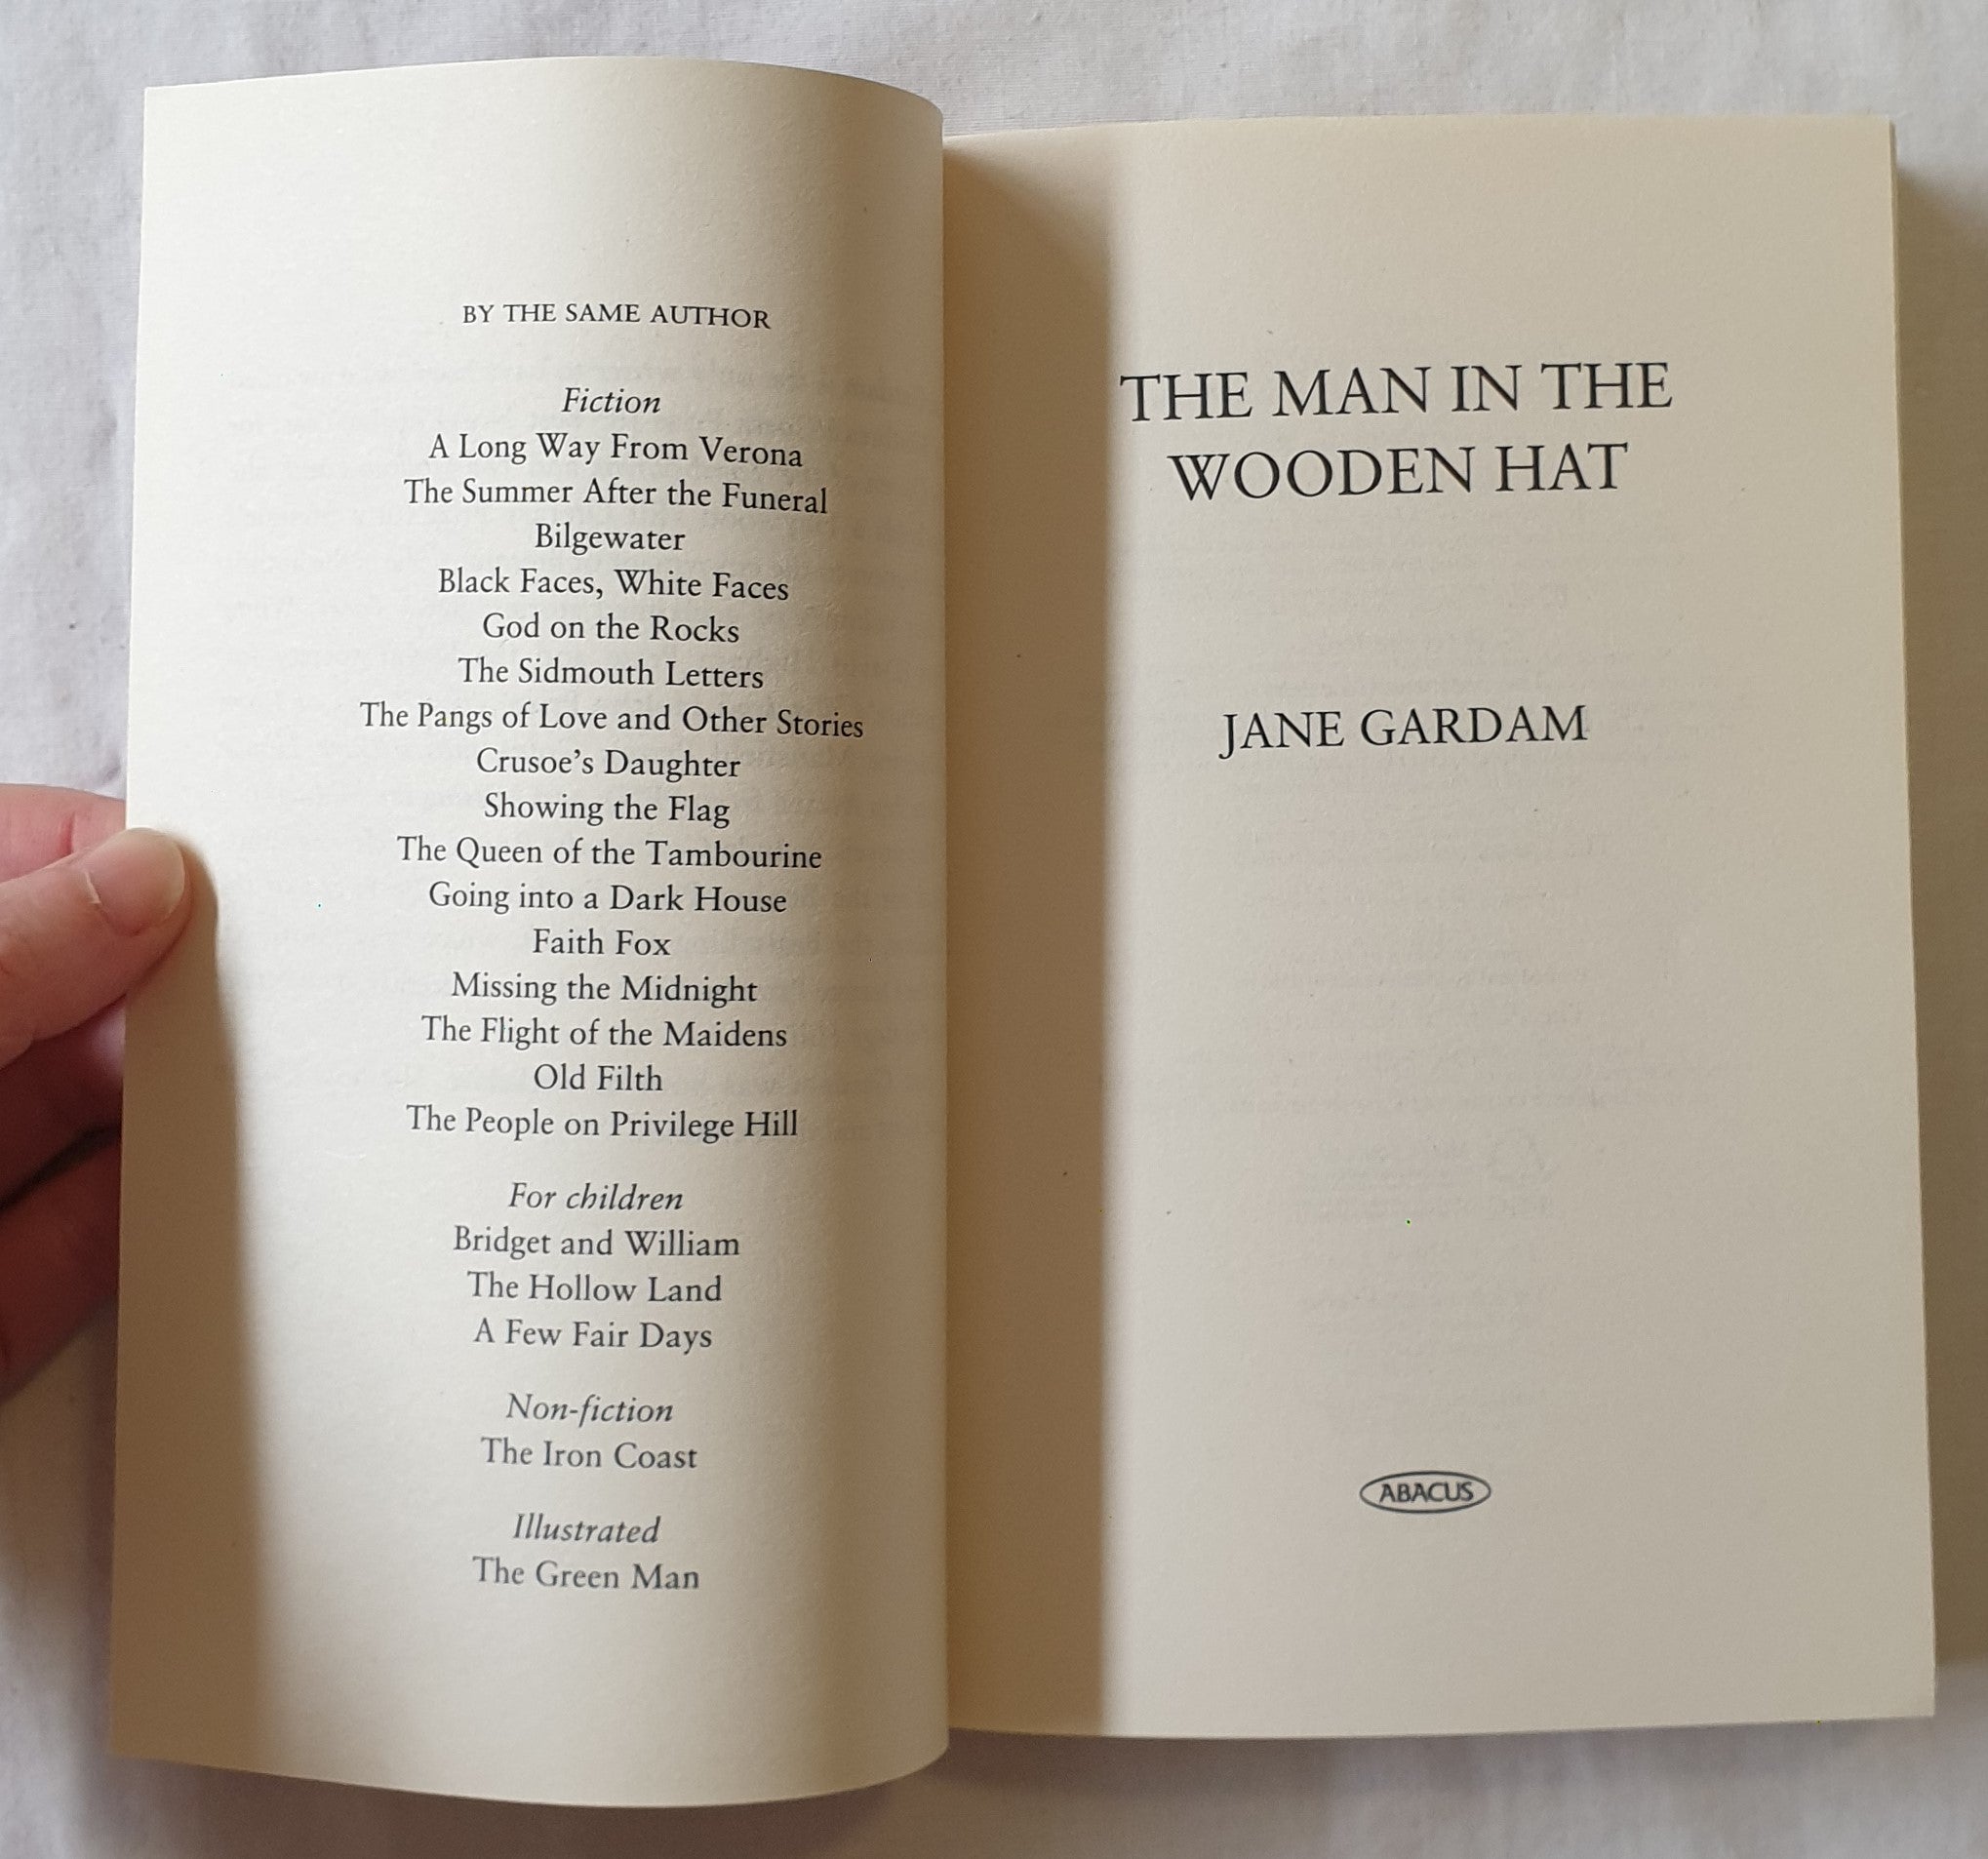 The　Jane　–　Man　Morgan's　Wooden　Books　in　the　Gardam　Hat　by　Rare